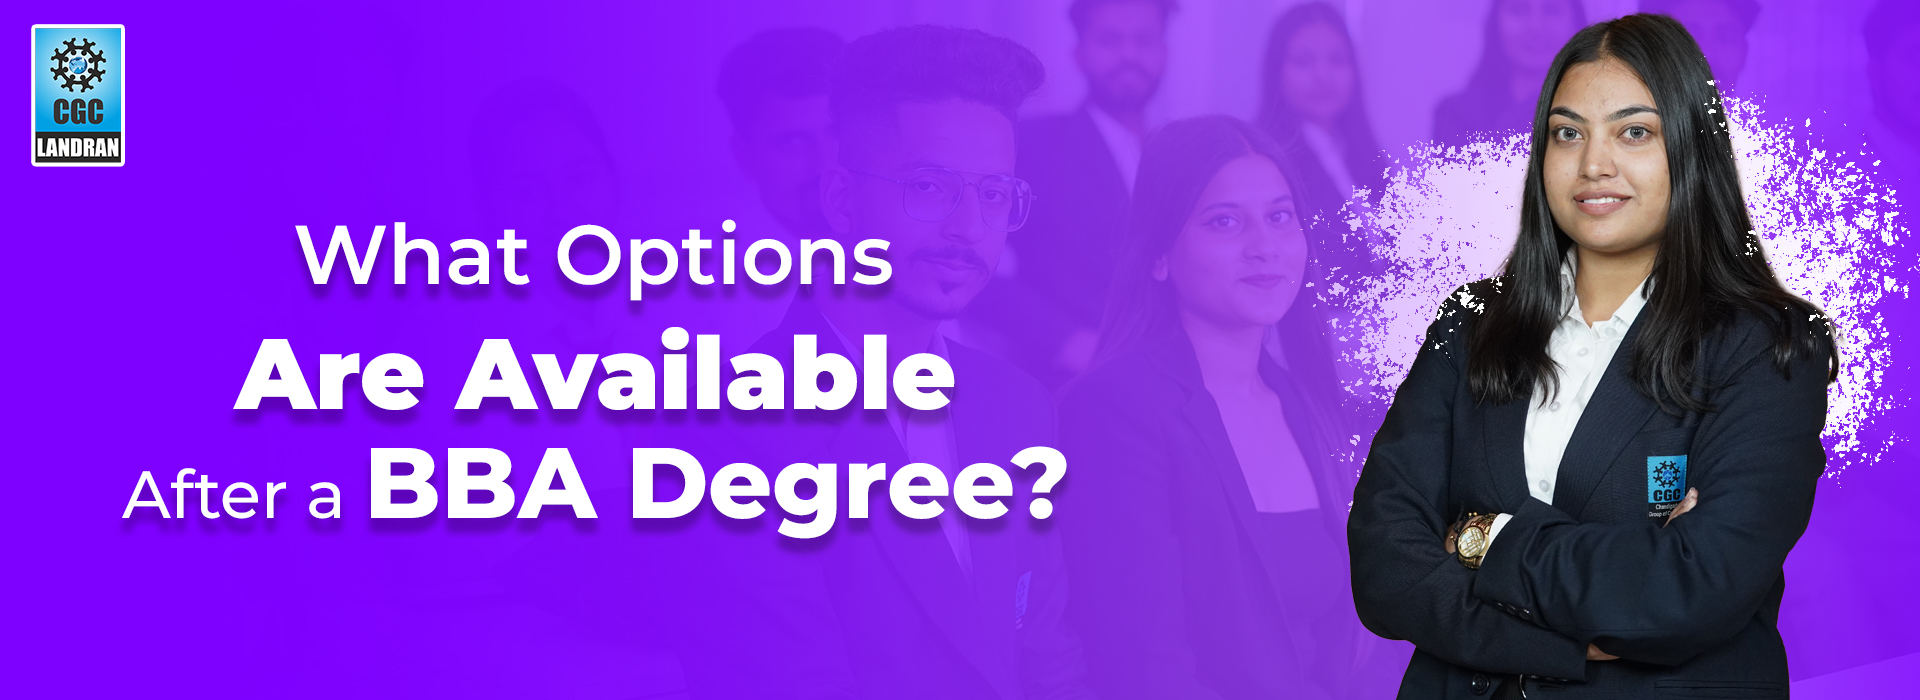 What options are available after a BBA degree? 